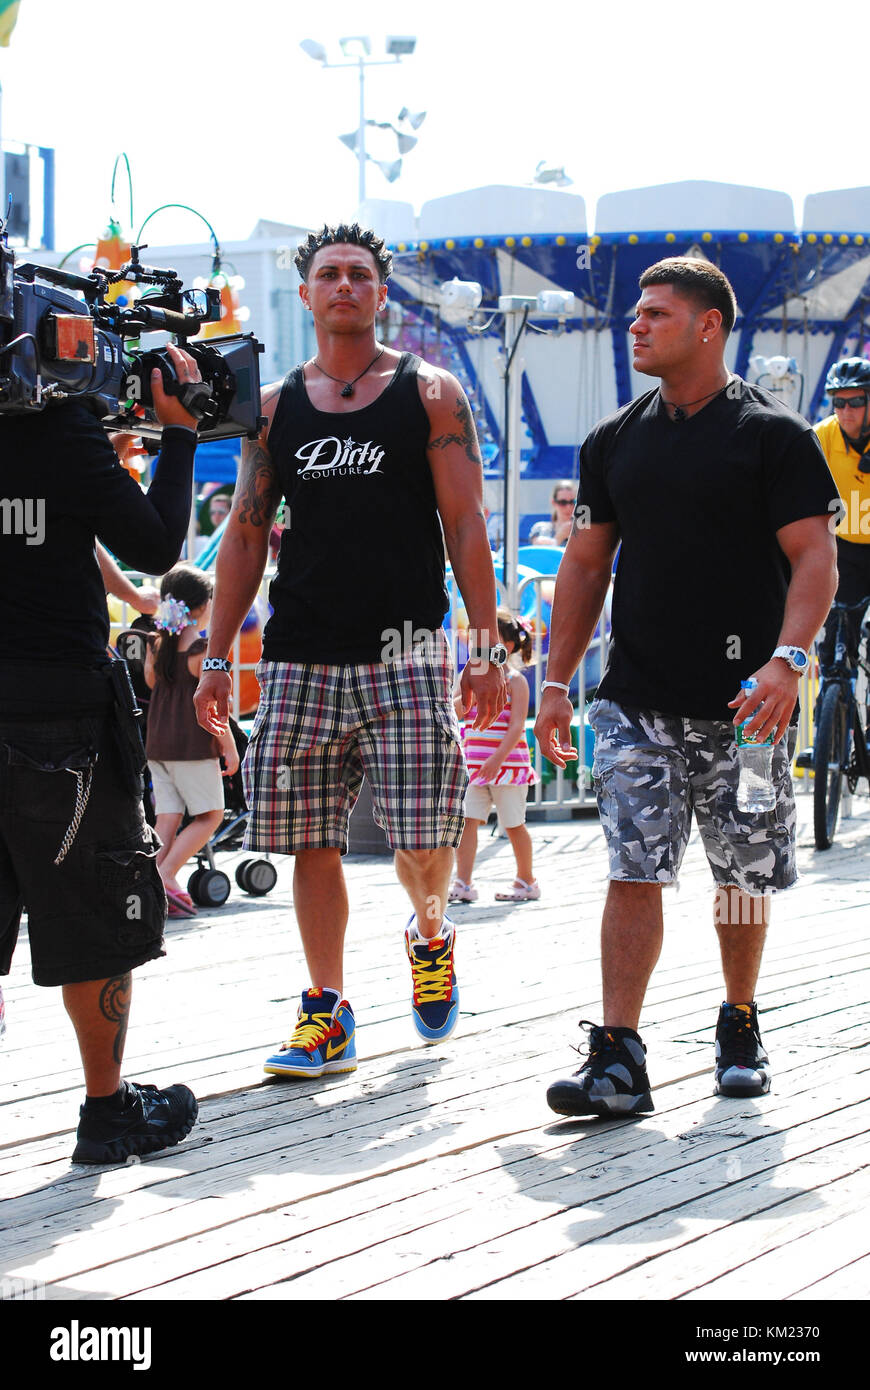 SEASIDE HEIGHTS, NJ - JULY 15: Ronnie Magro filming on location for 'Jersey  Shore' on July 15, 2011 in Seaside Heights, New Jersey. People: Ronnie Magro  Stock Photo - Alamy